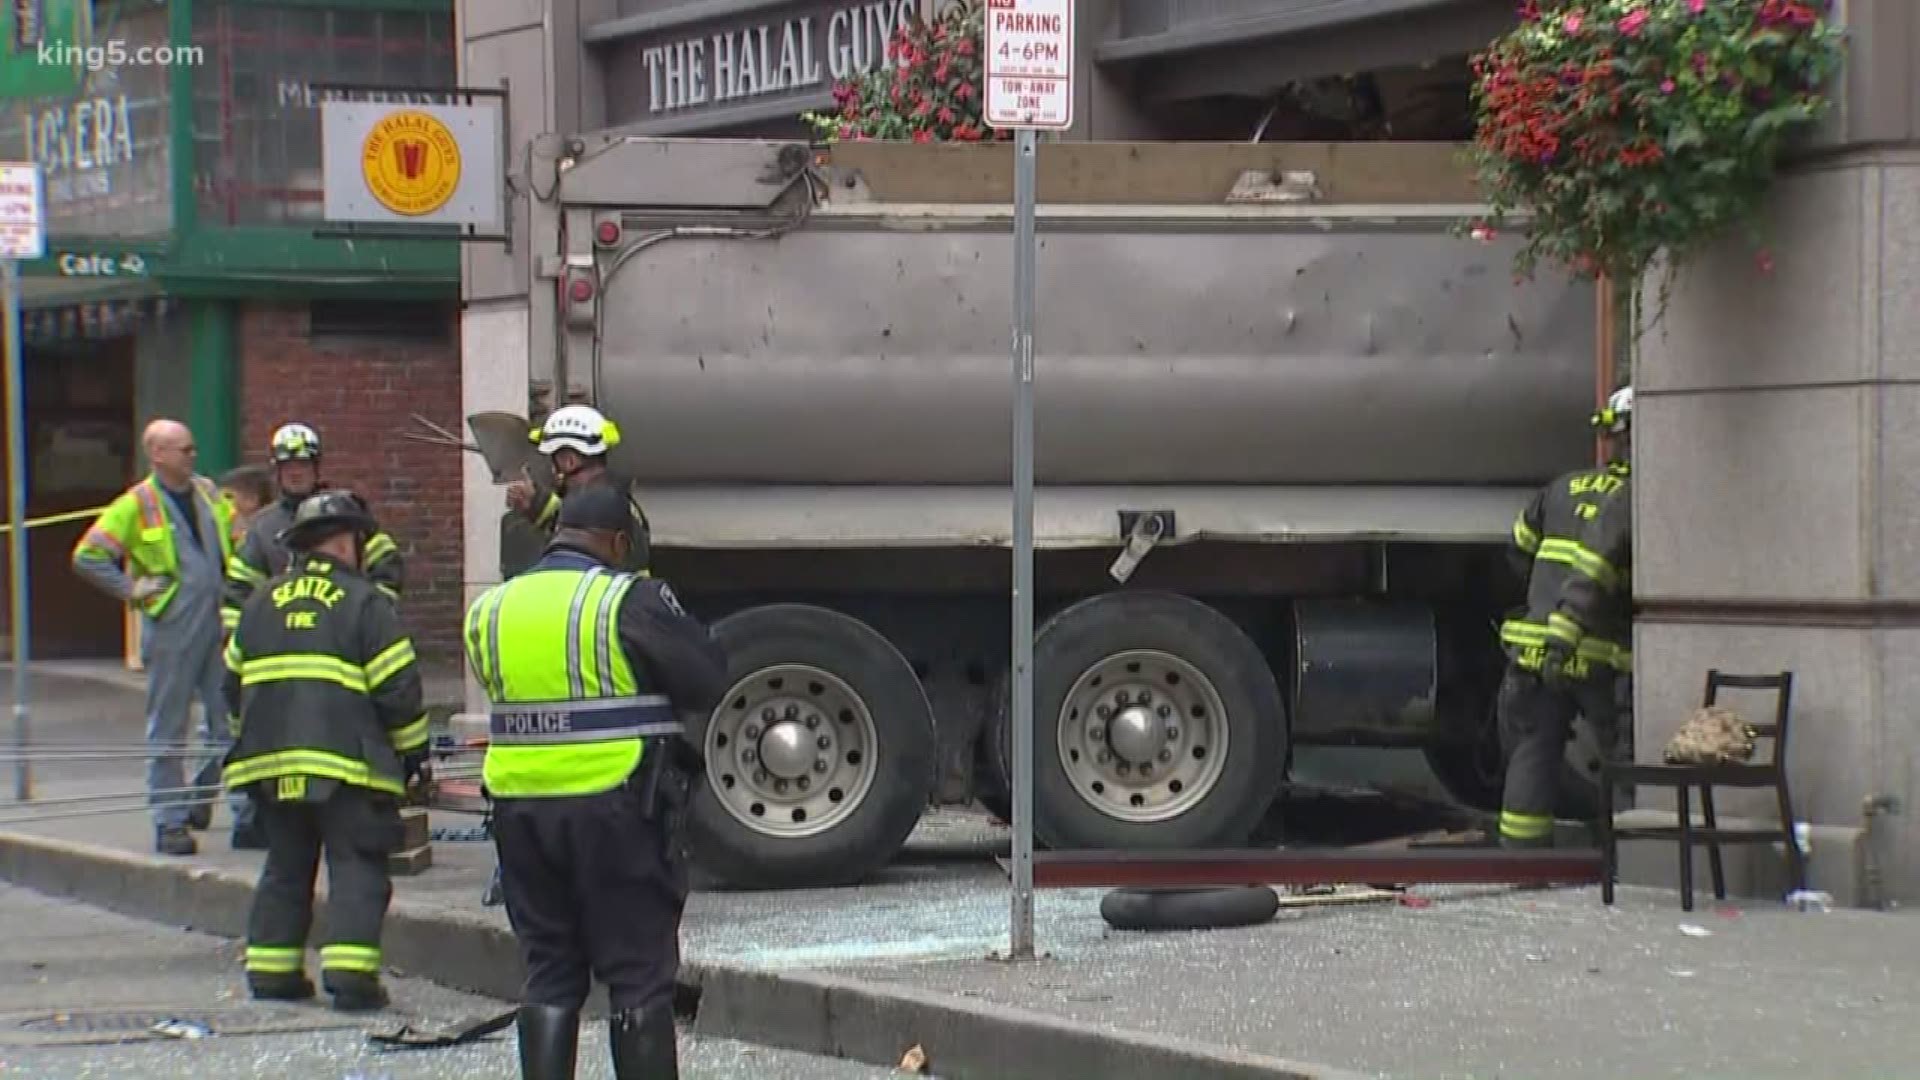 Newly released 911 audio from when a dump truck crashed into a Subway restaurant in Pioneer Square sheds light on how good samaritans rushed in to help.